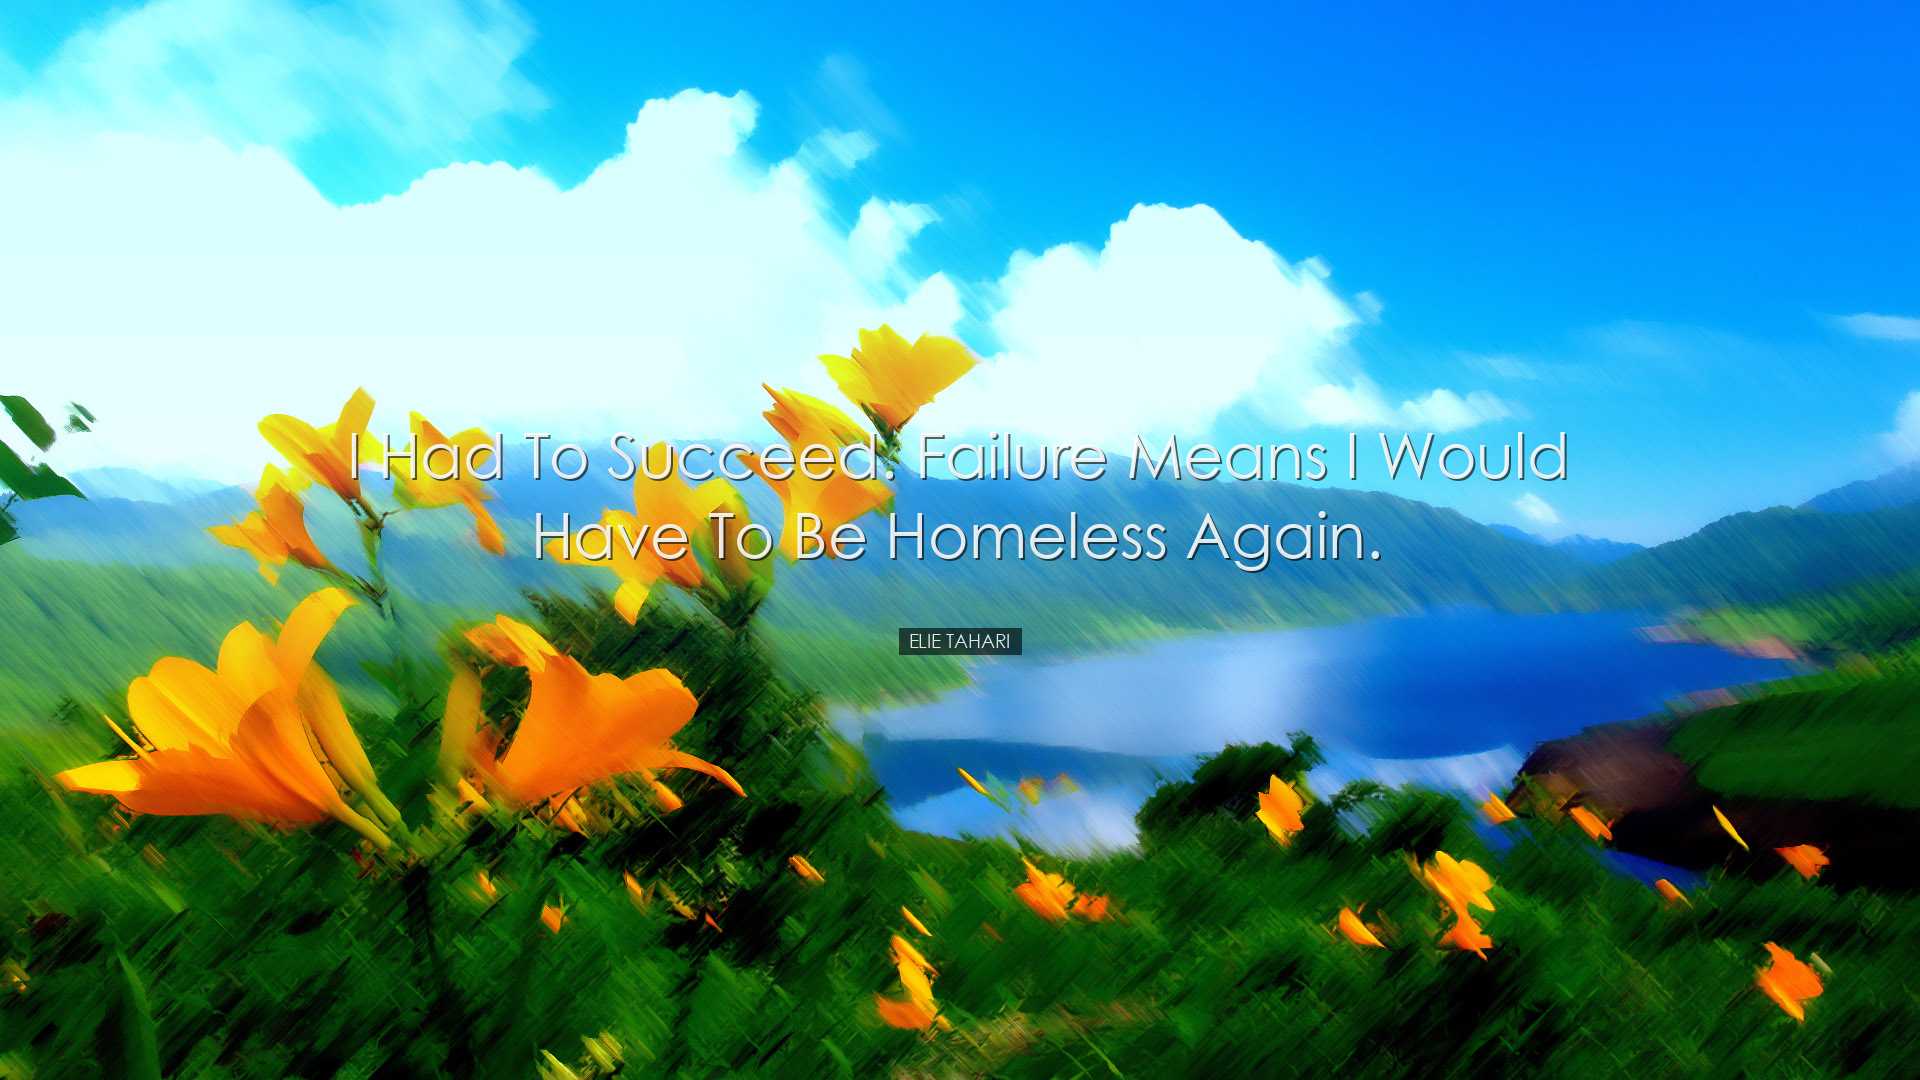 I had to succeed. Failure means I would have to be homeless again.